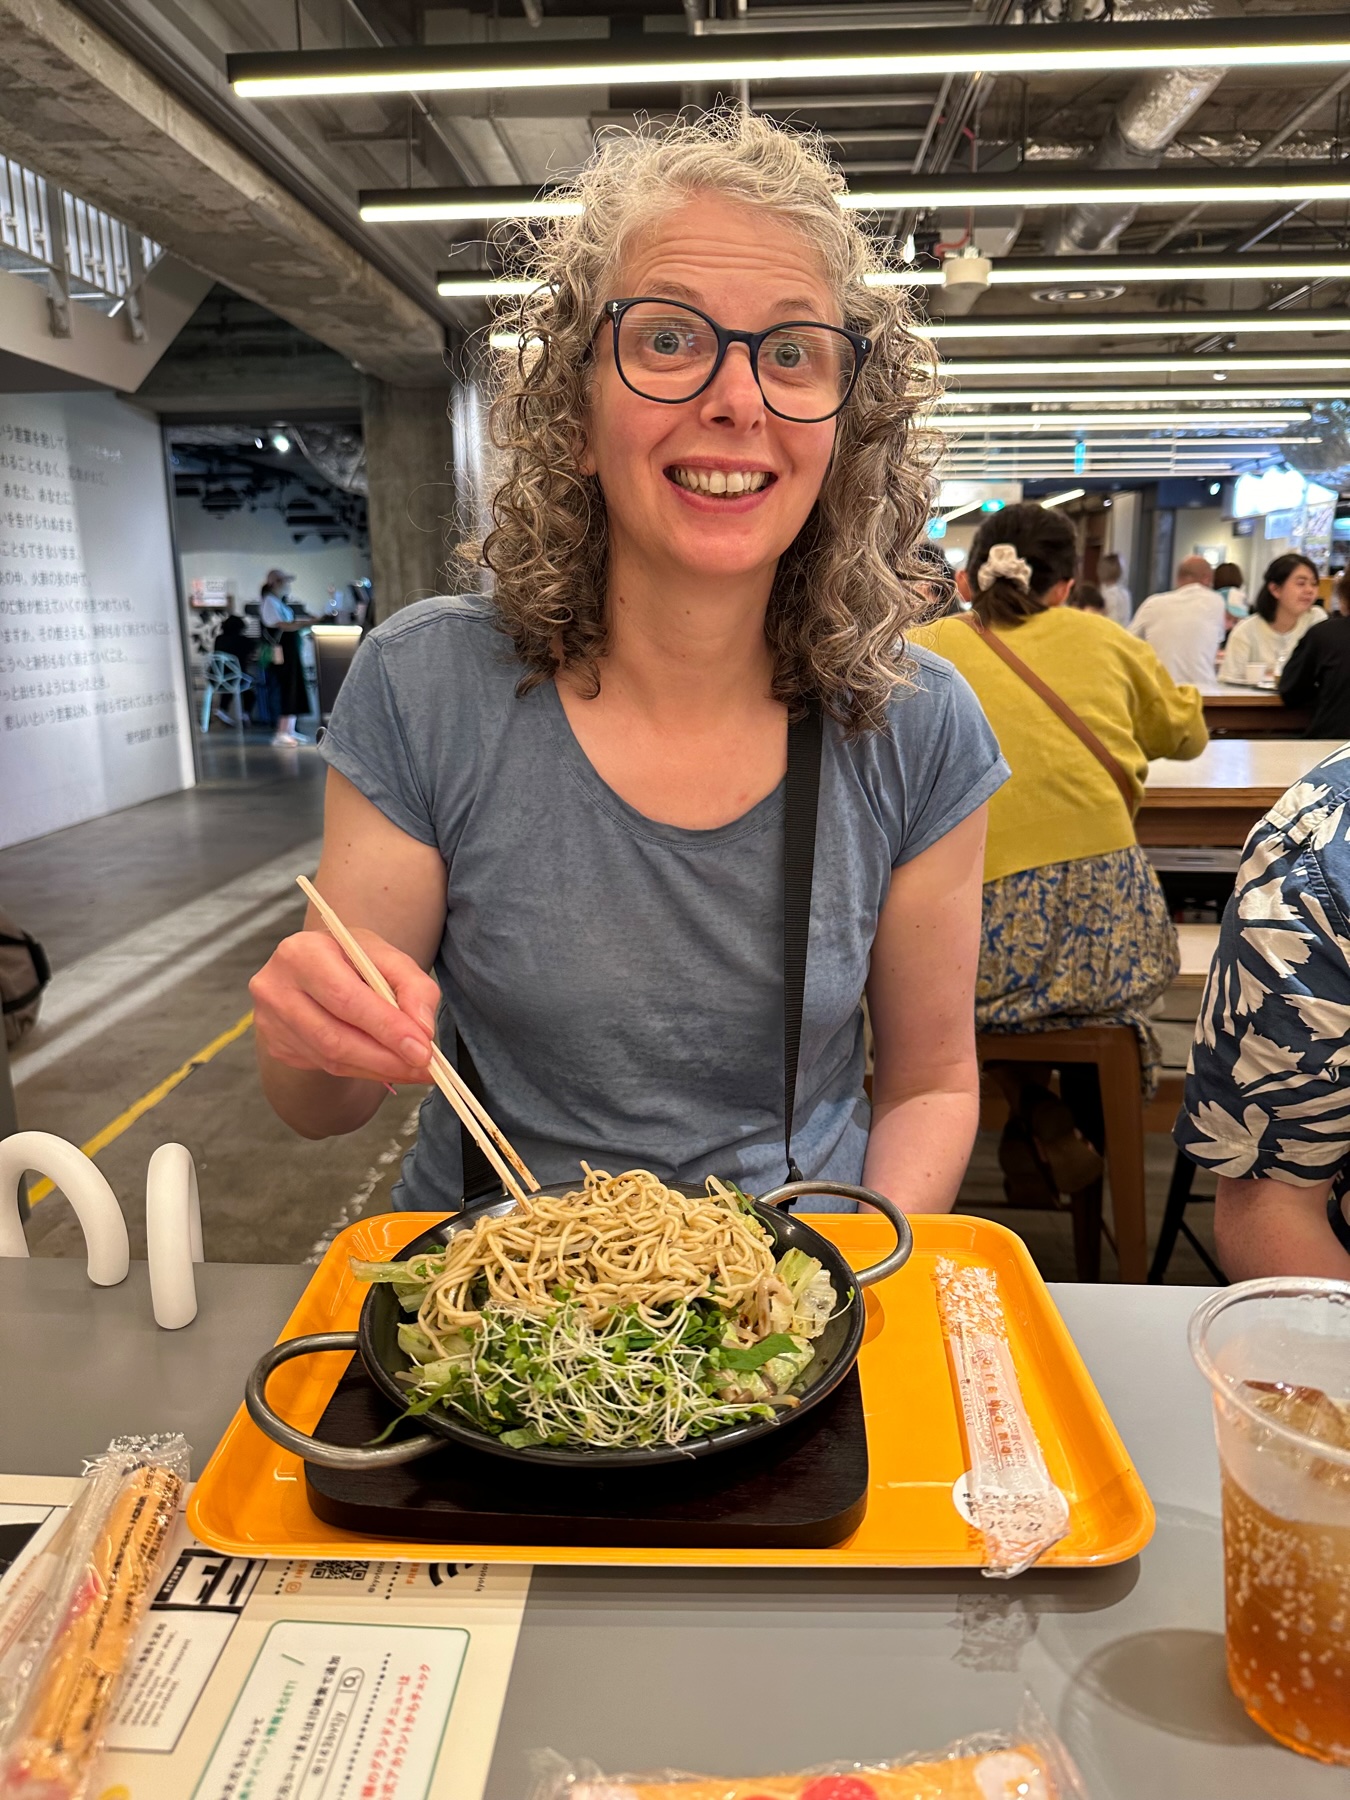 My Wife eating vegan noodles with lots of green stems